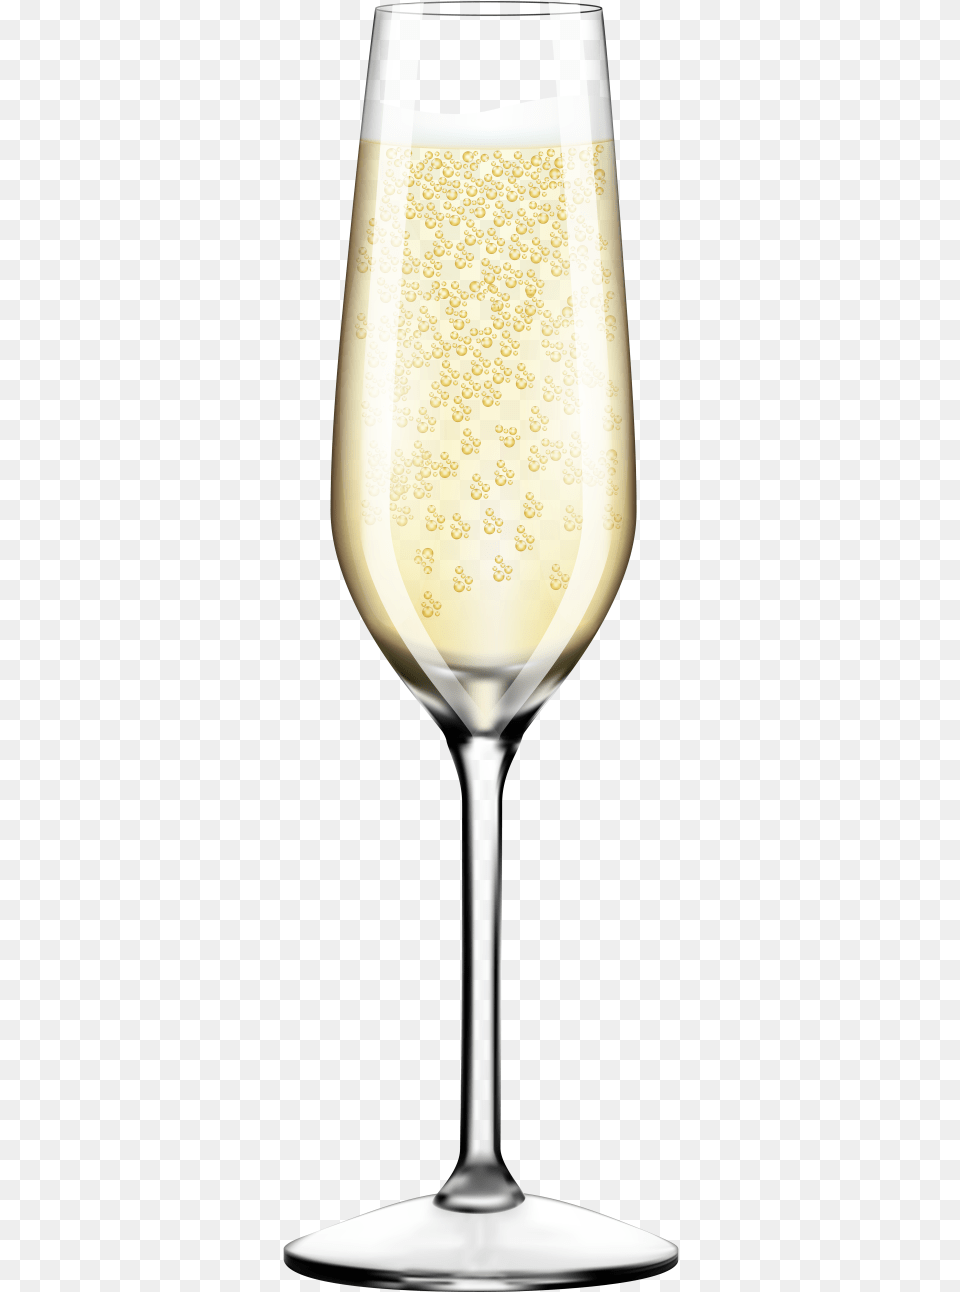 Champagne Glass Clip Art Image Glass Of Champagne Background, Alcohol, Beverage, Liquor, Wine Free Transparent Png